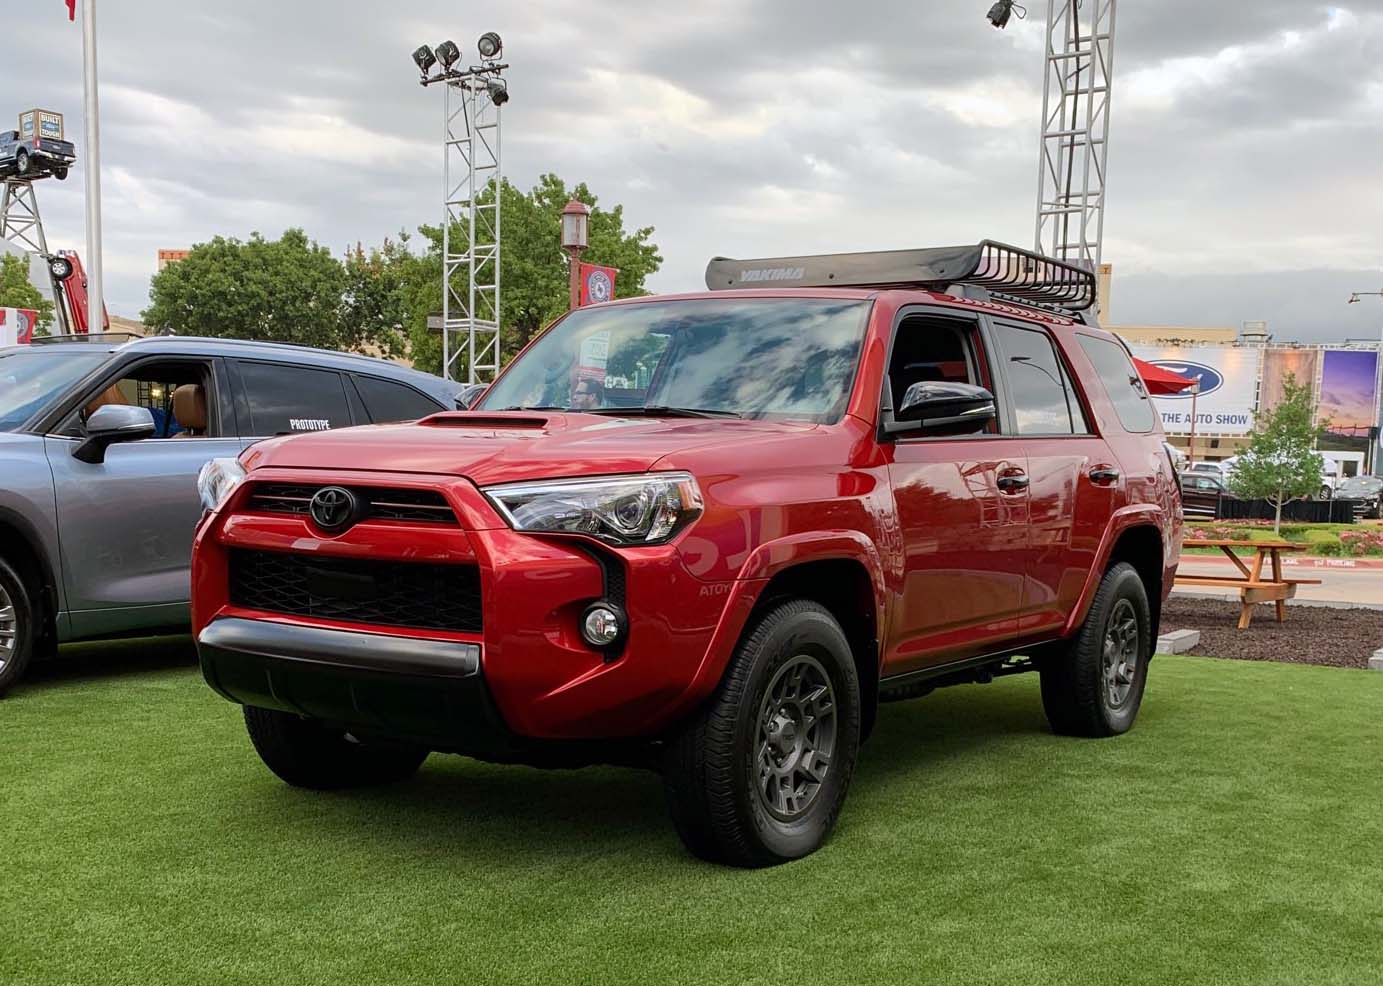 2020 Toyota 4runner Venture Edition Arrives With Yakima